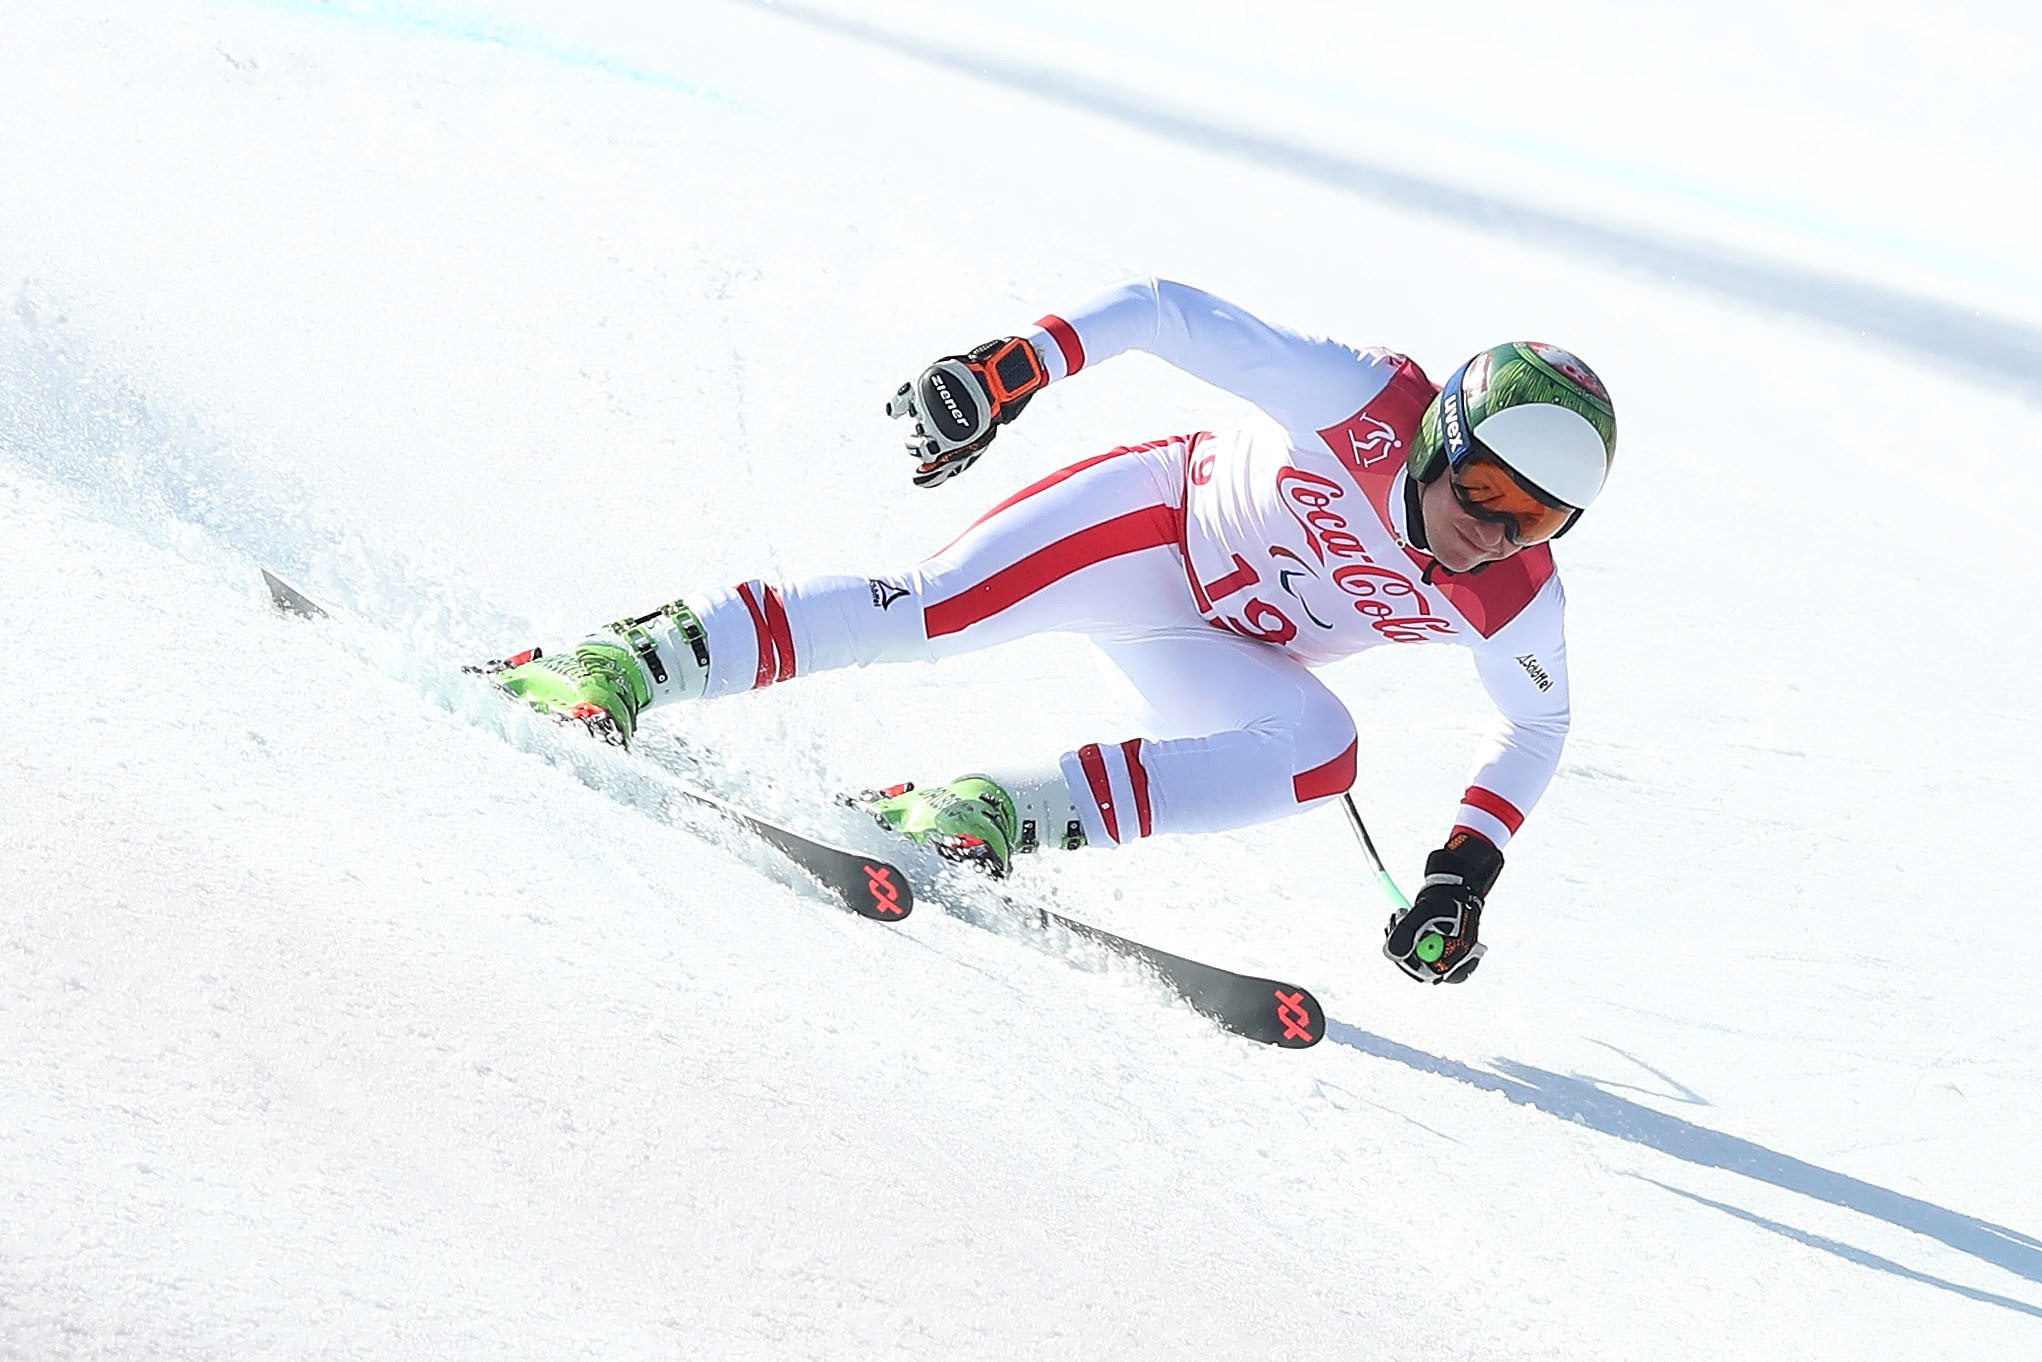 Markus Salcher took two golds in the downhill and super-G in Lillehammer ©Getty Images